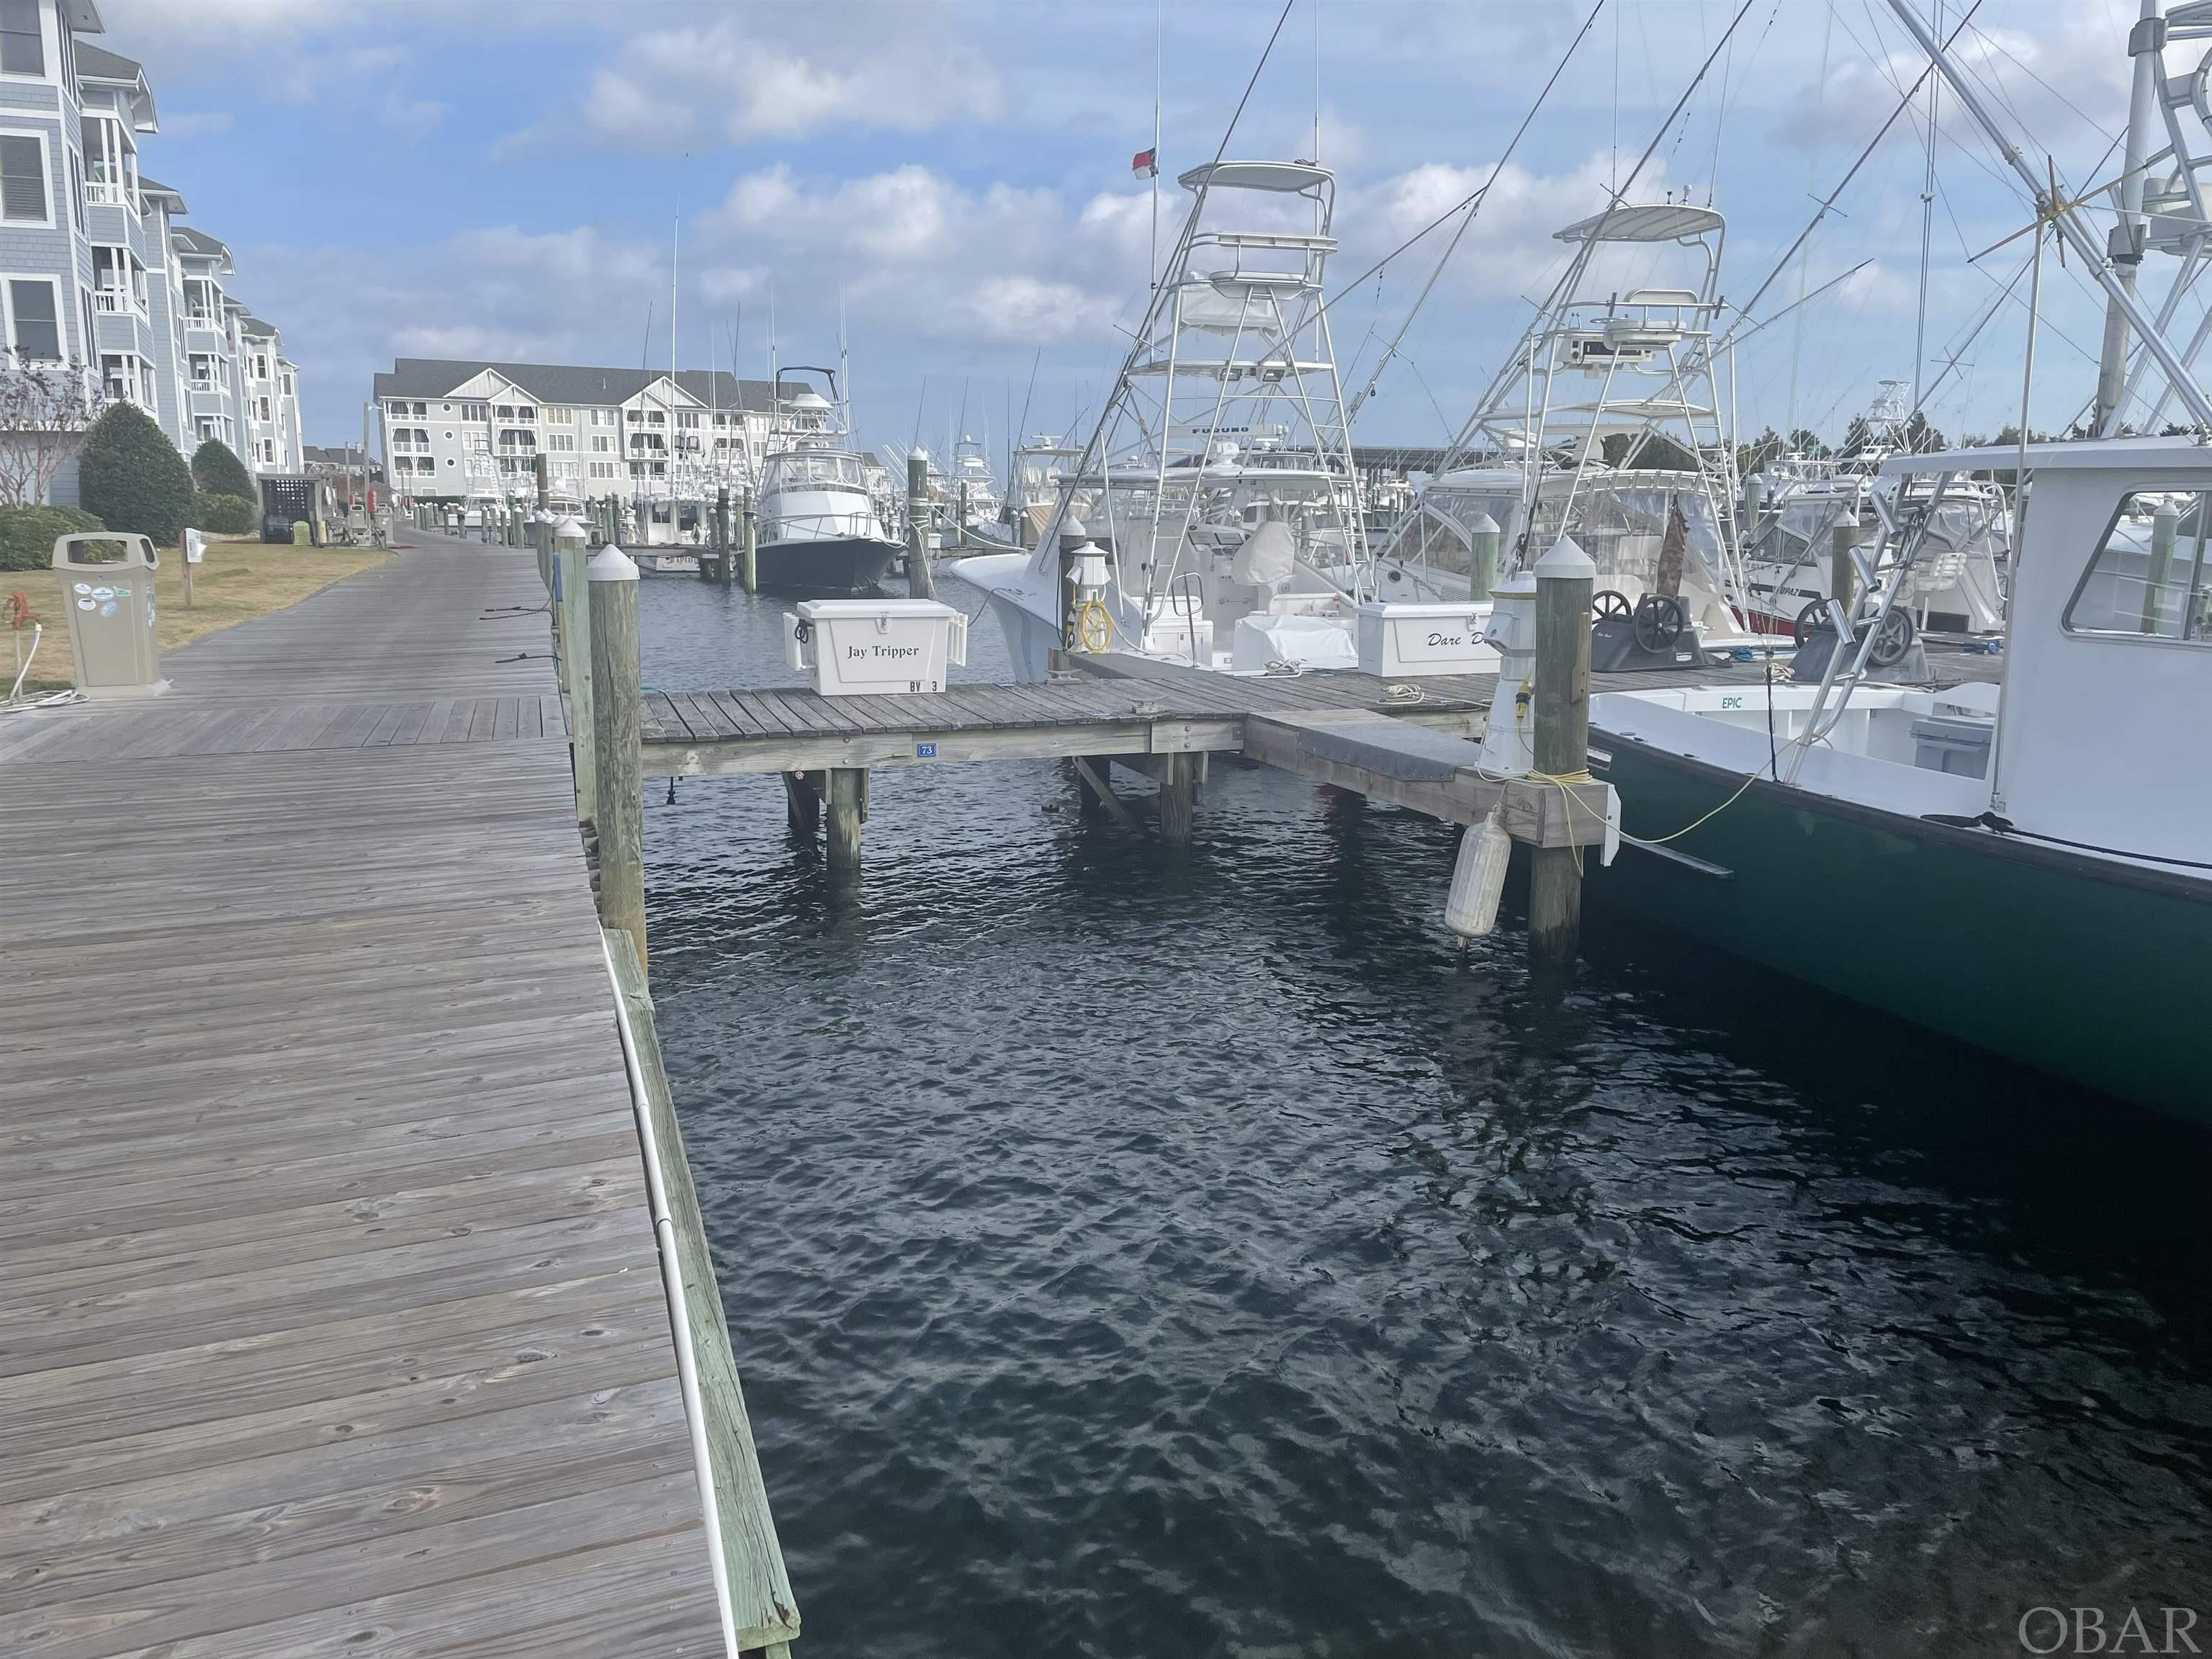 Lowest priced Boat slip in Pirate's Cove. 45x15 located on A Dock. Close to the Ship's Store, Tiki Bar, Bath House and Restaurant.  In slip diesel fueling. There are private fish cleaning stations located throughout the marina. Easy access to parking. New finger piers being installed in the next couple of weeks. Pirates Cove Marina is a world class fishing destination. Come check out this boat slip today.